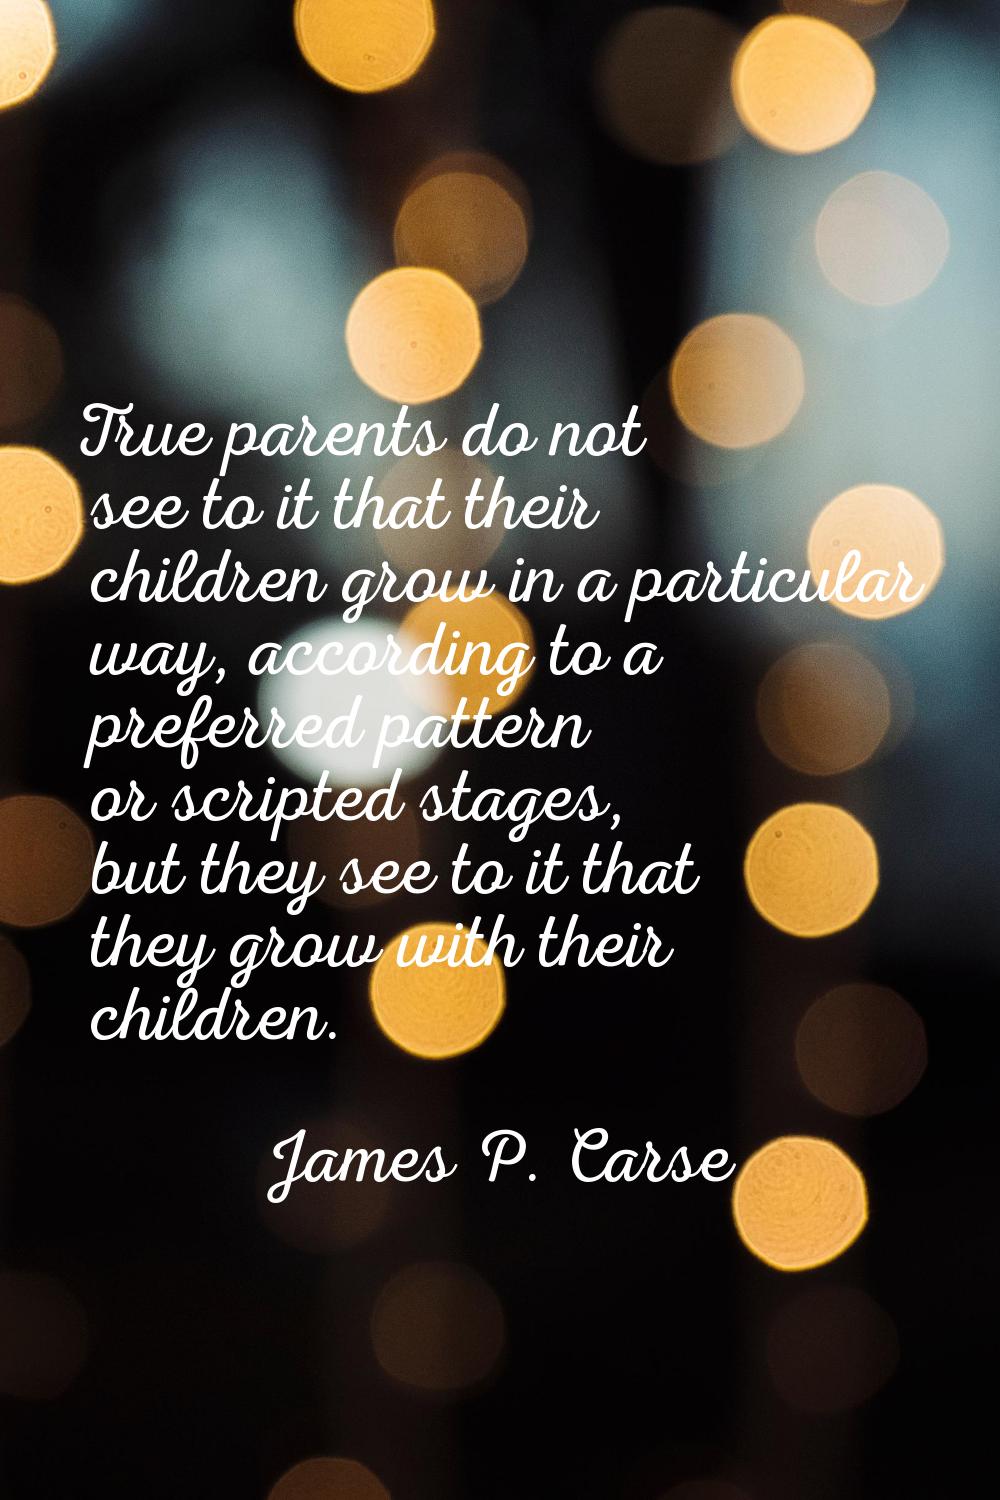 True parents do not see to it that their children grow in a particular way, according to a preferre